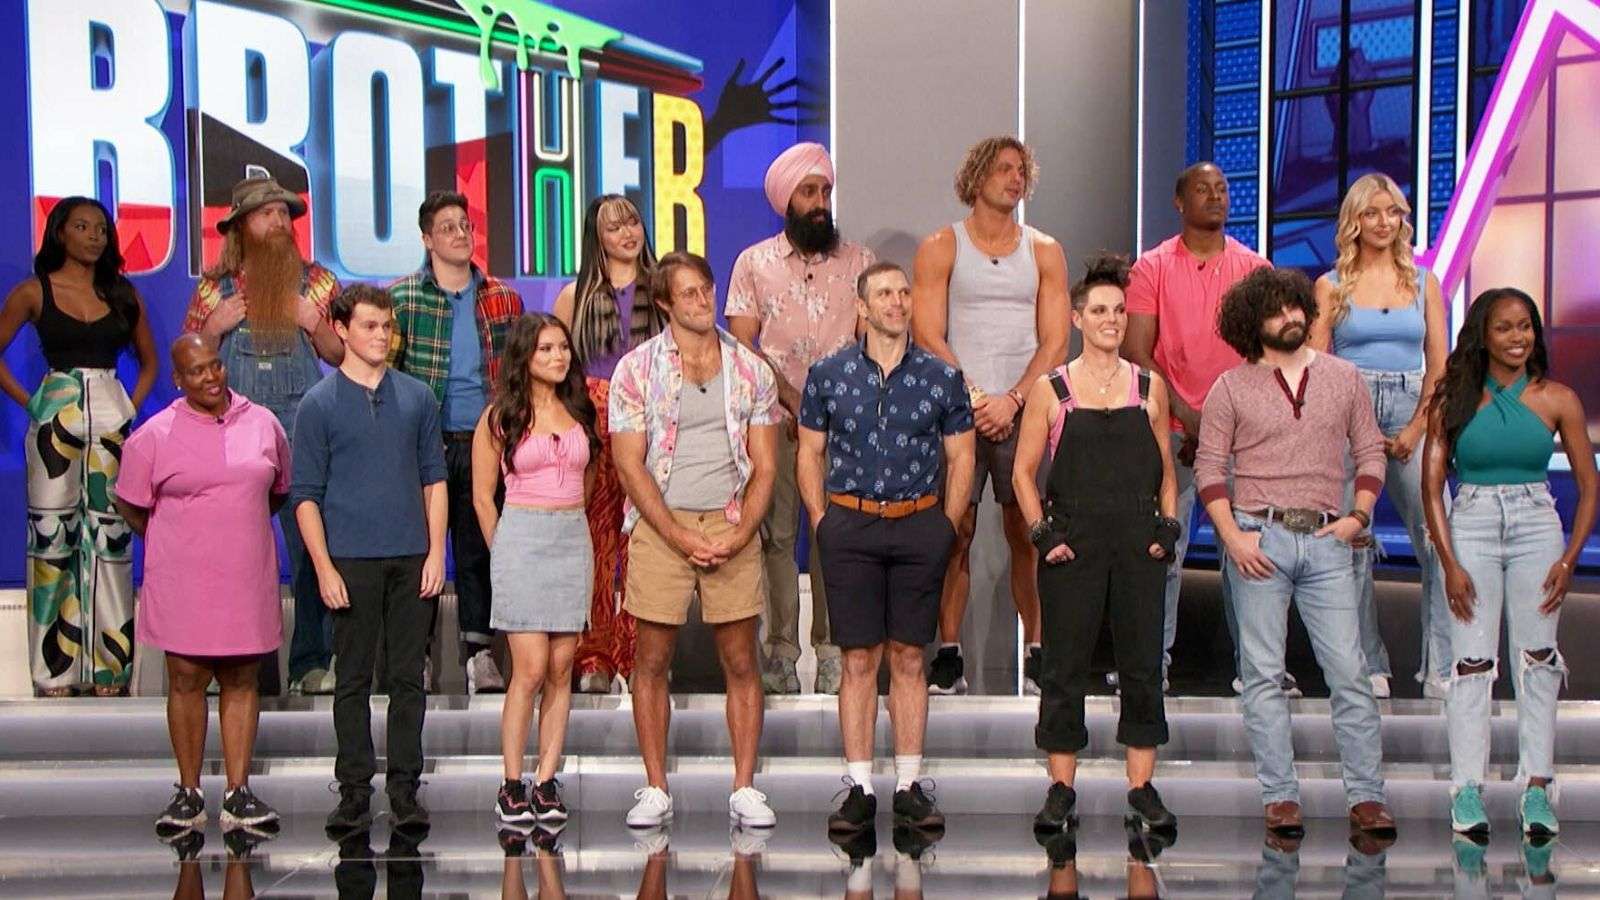 The Season 25 cast of Big Brother